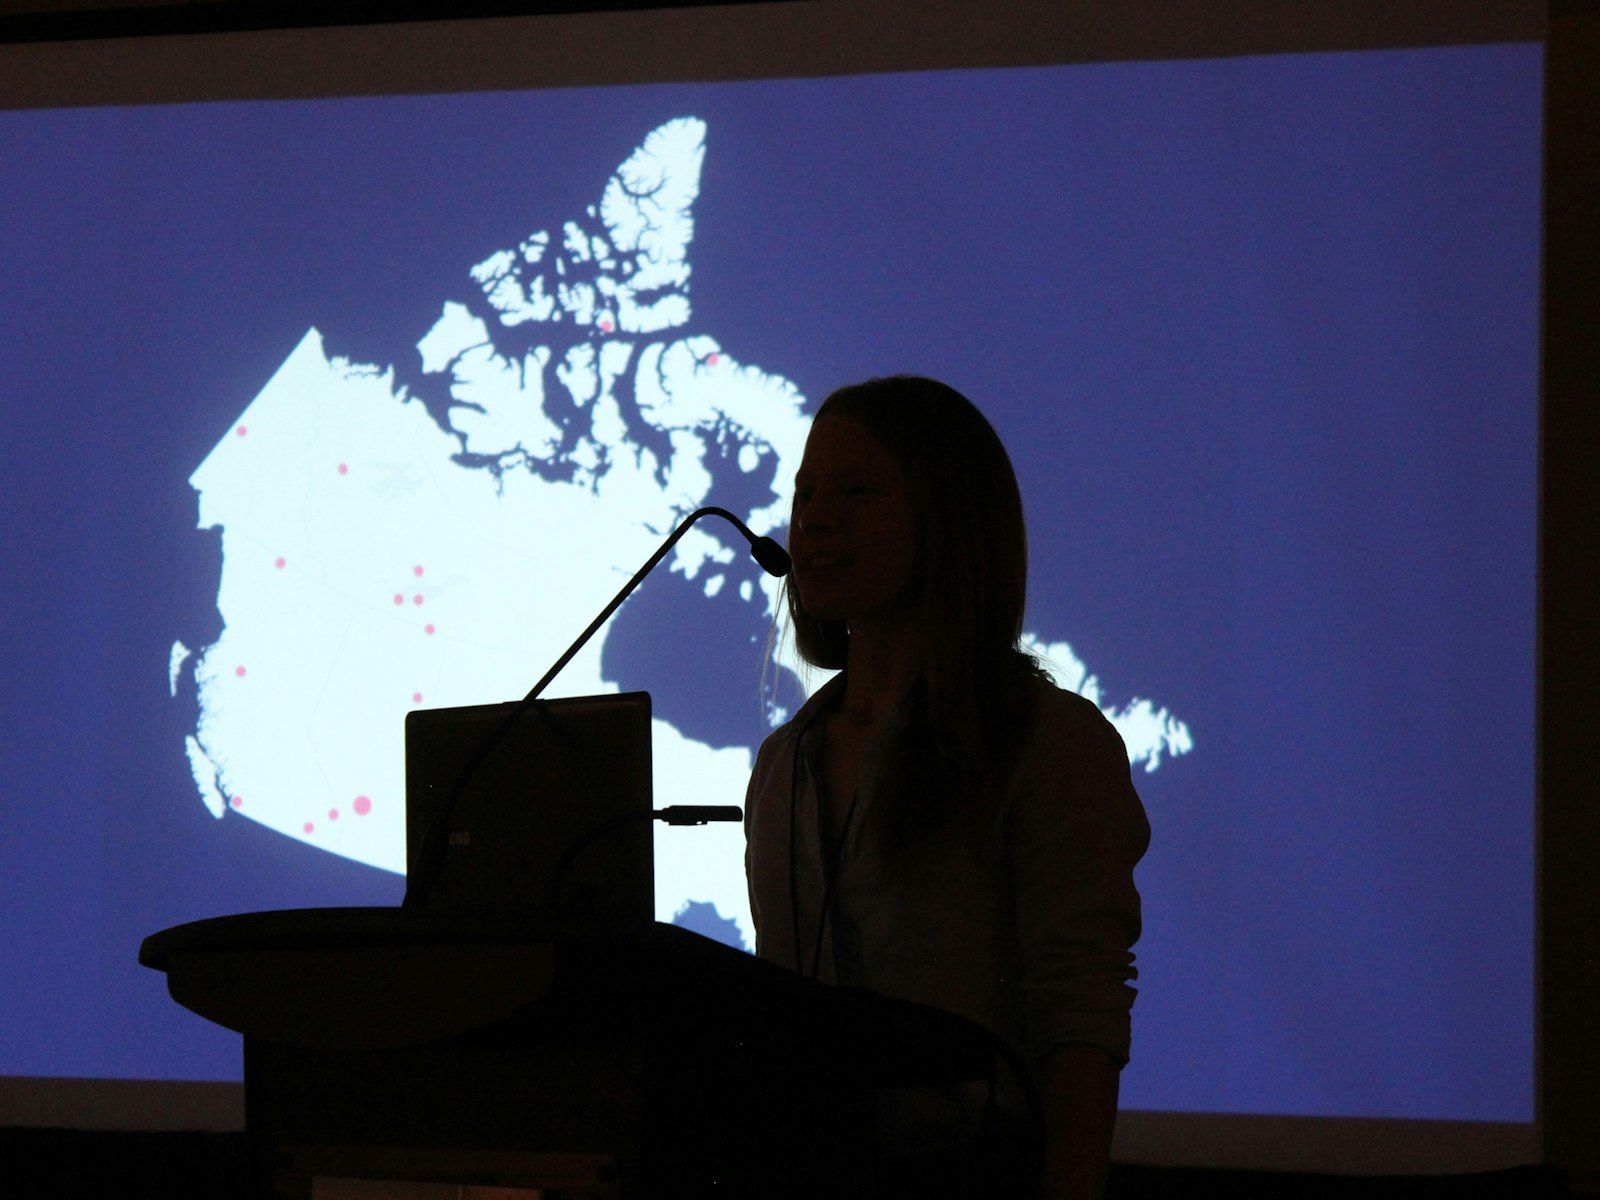 One of the presenters at the National Discussion Event convened by The Gordon Foundation, Living Lakes Canada and WWF-Canada. 